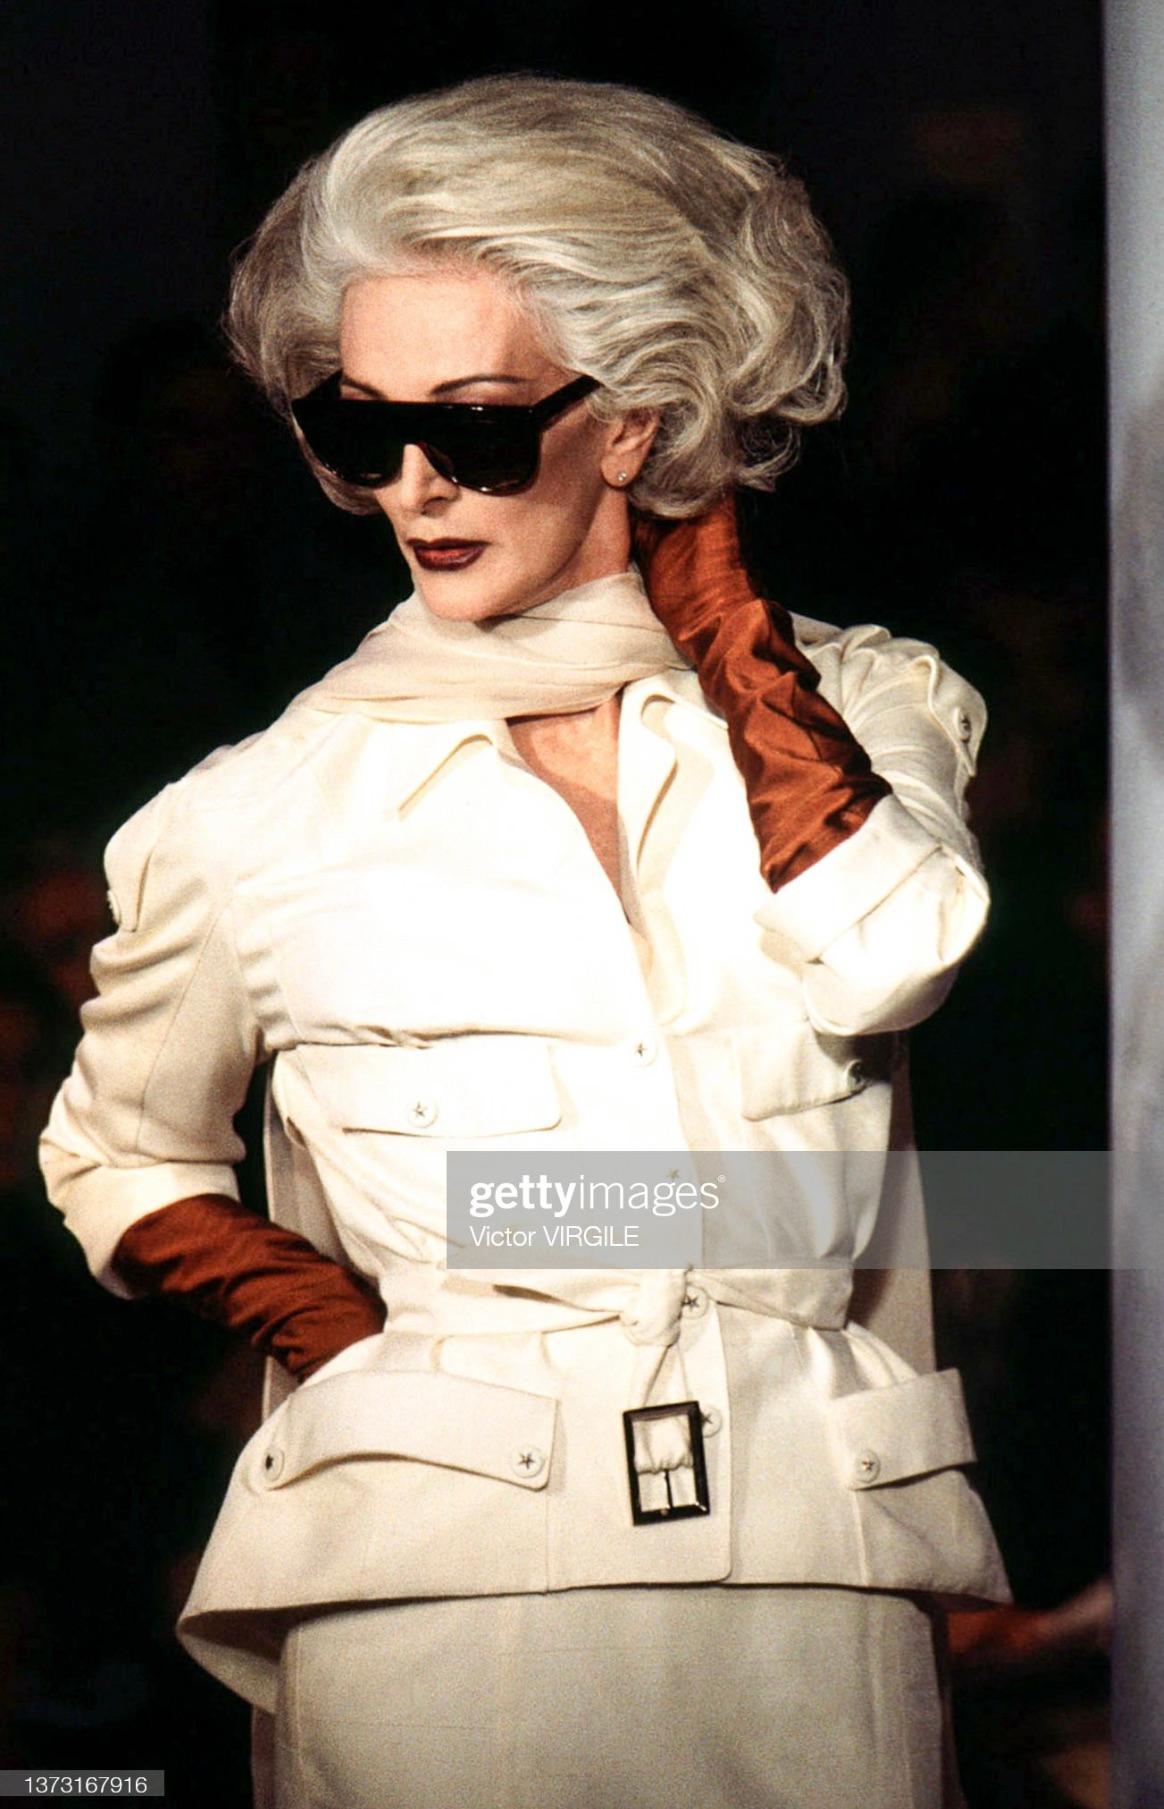 Presenting a fabulous khaki Thierry Mugler skirt suit, designed by Manfred Mugler. From the Spring/Summer 1996 collection, a version of this fabulous set debuted on the season's runway modeled by Carmen Dell'Orefice. The blazer features pockets at